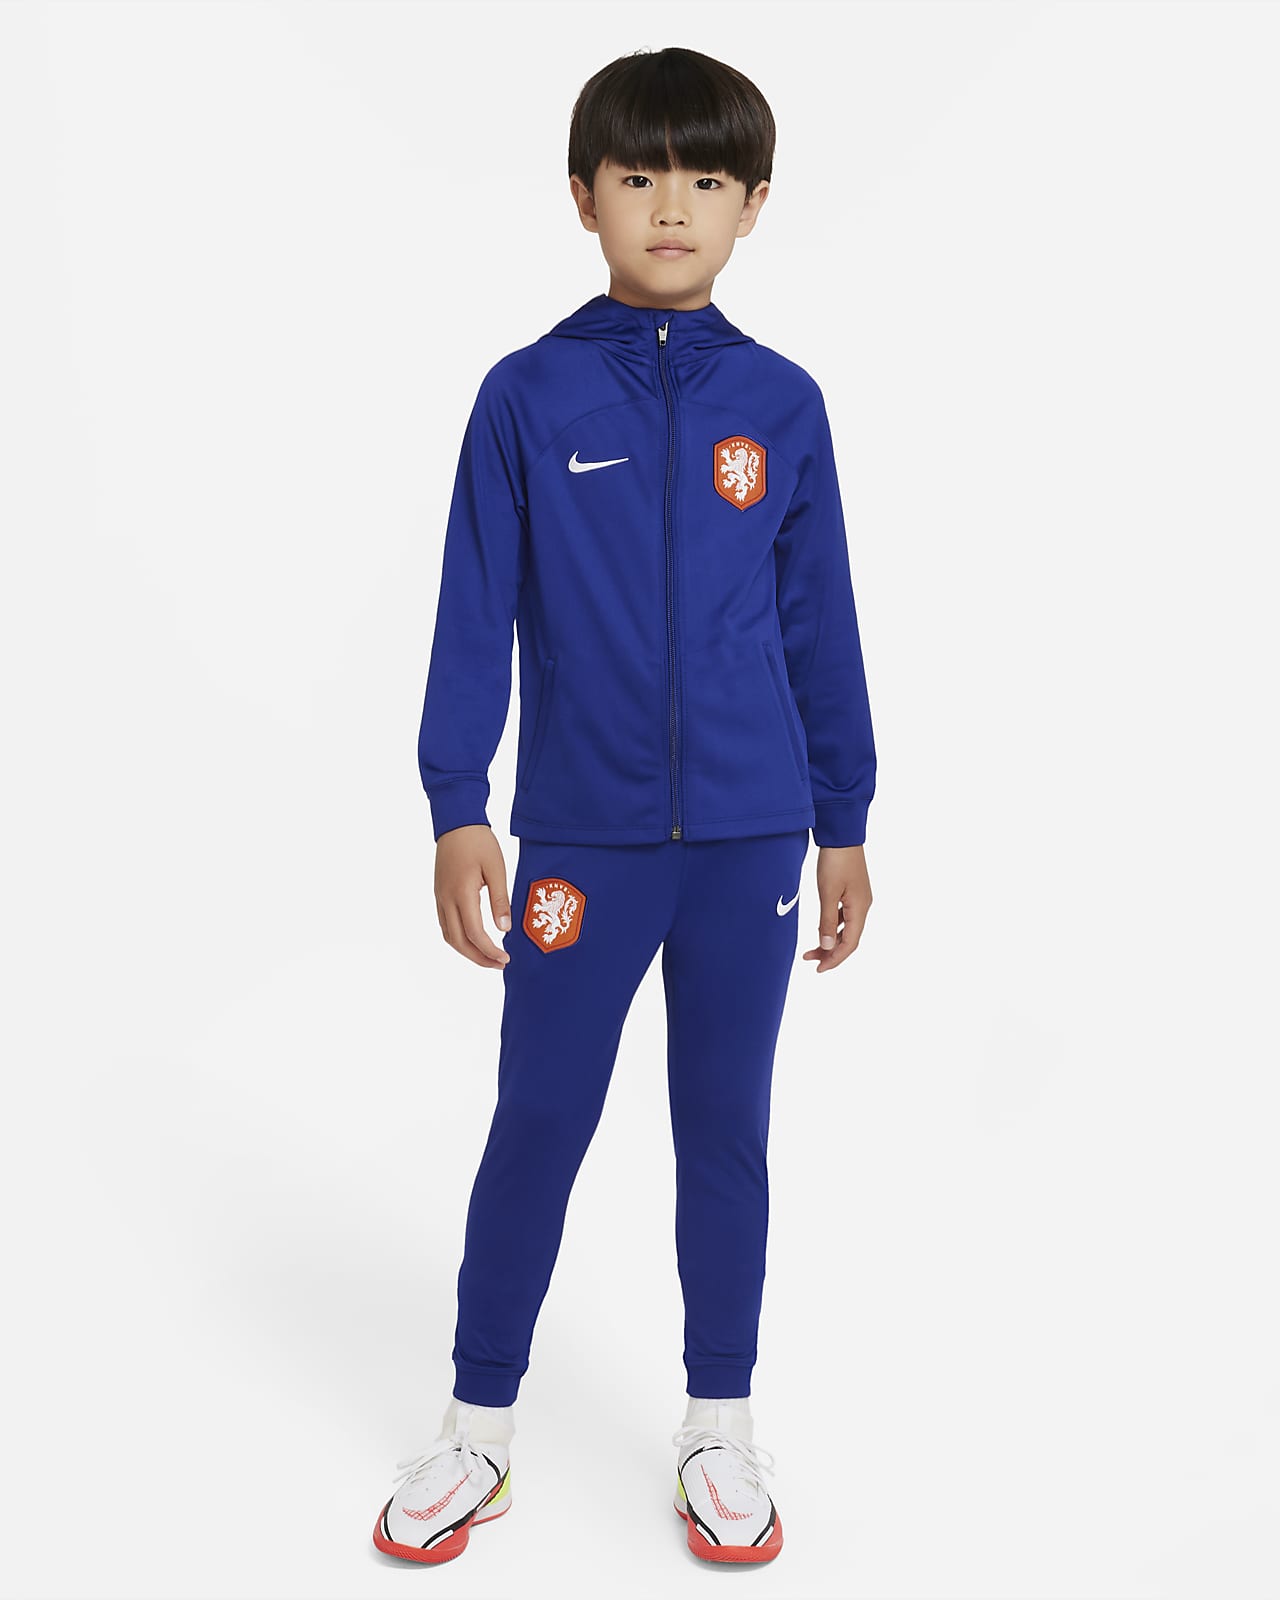 Netherlands Strike Younger Kids' Nike Dri-FIT Hooded Football Tracksuit